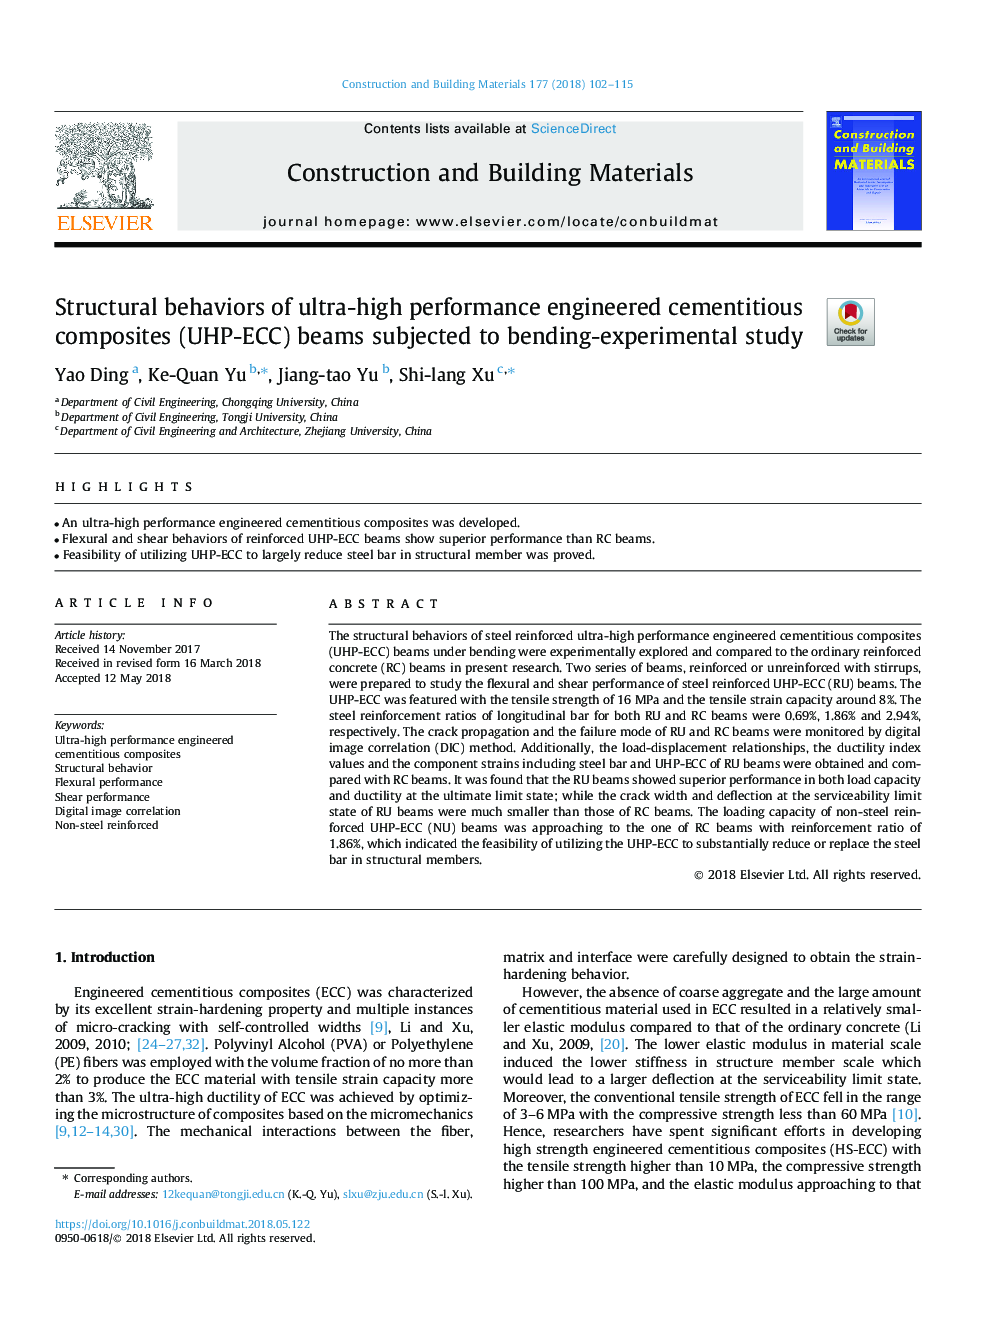 Structural behaviors of ultra-high performance engineered cementitious composites (UHP-ECC) beams subjected to bending-experimental study